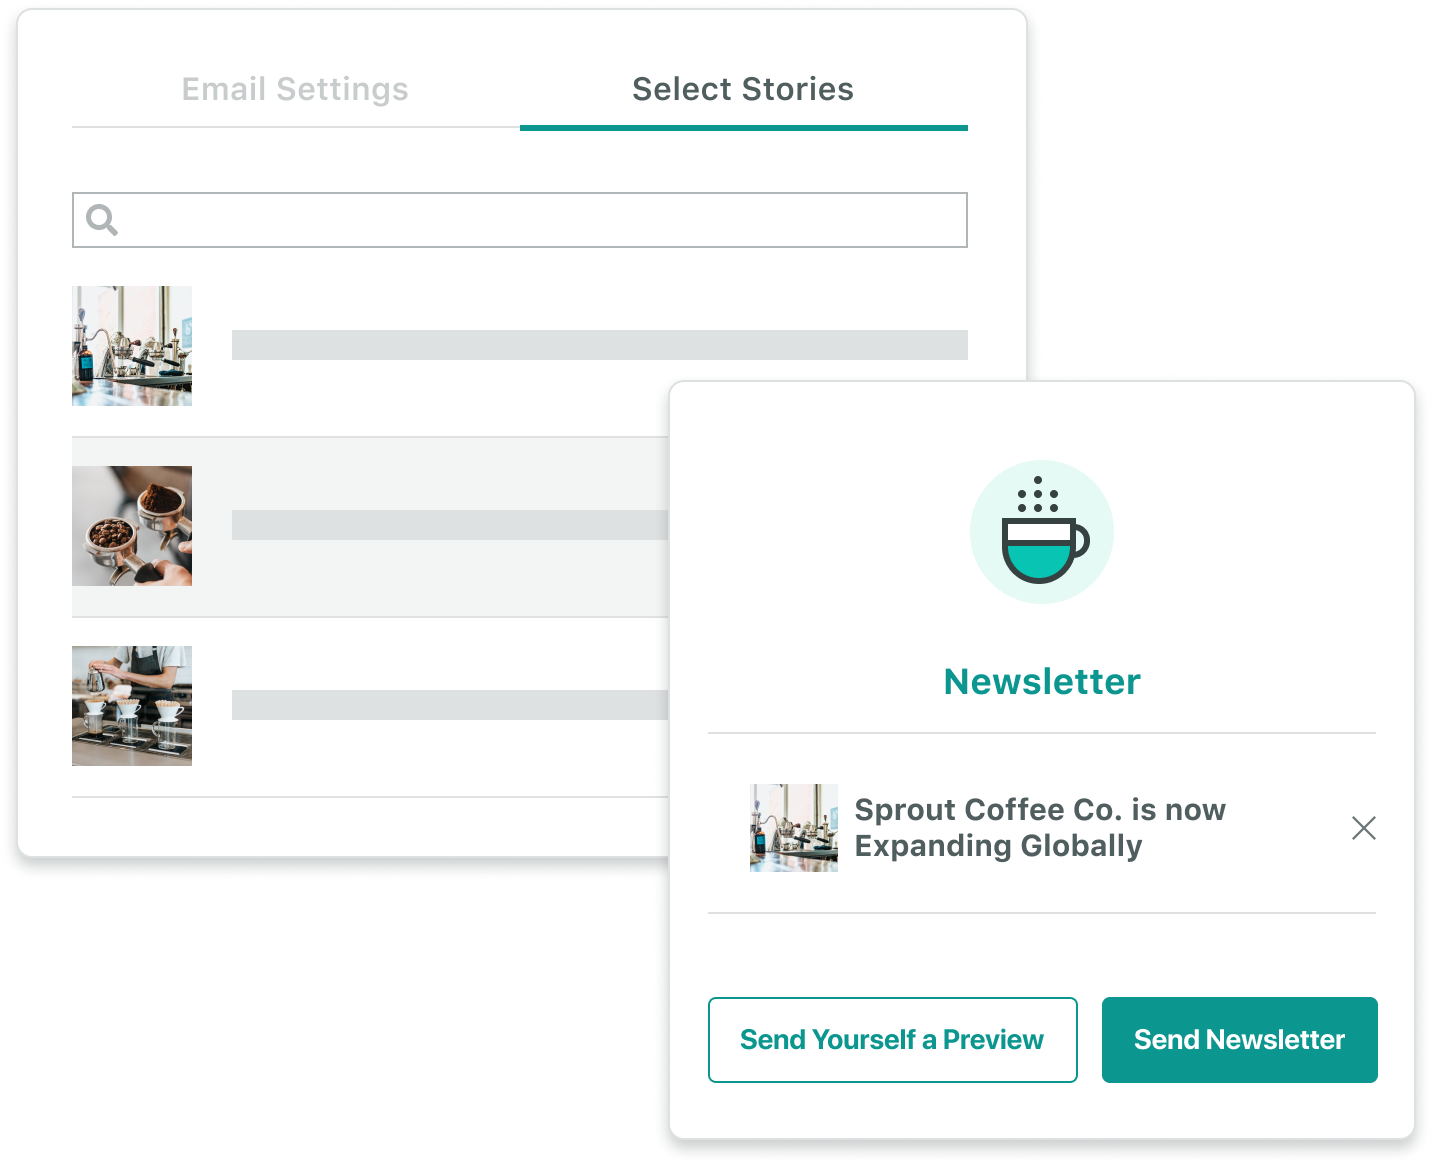 Employee advocacy software enables sharing via newsletters